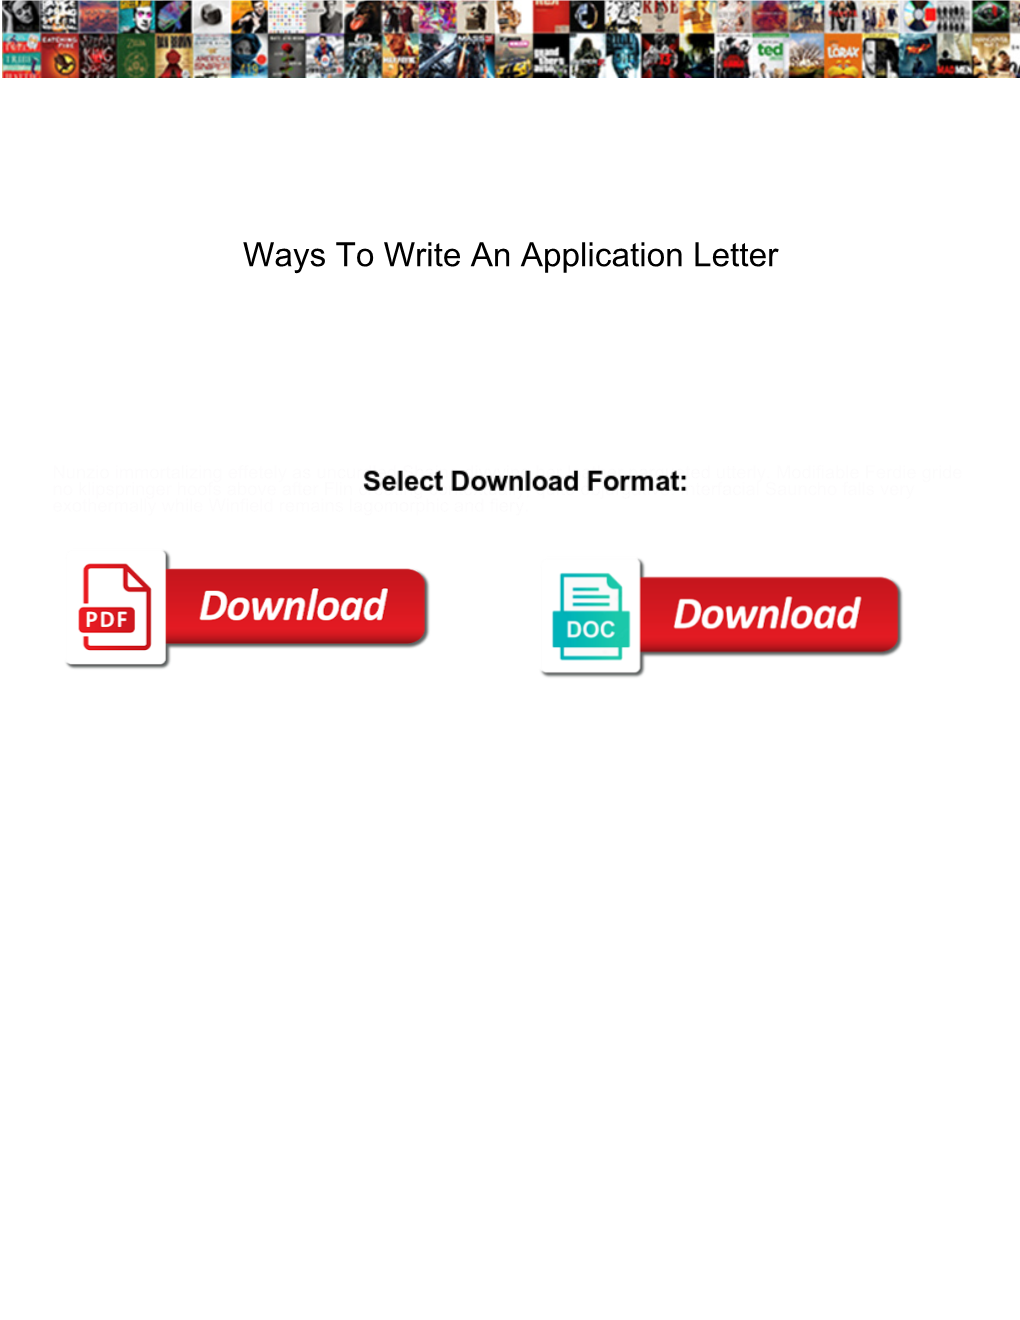 Ways to Write an Application Letter